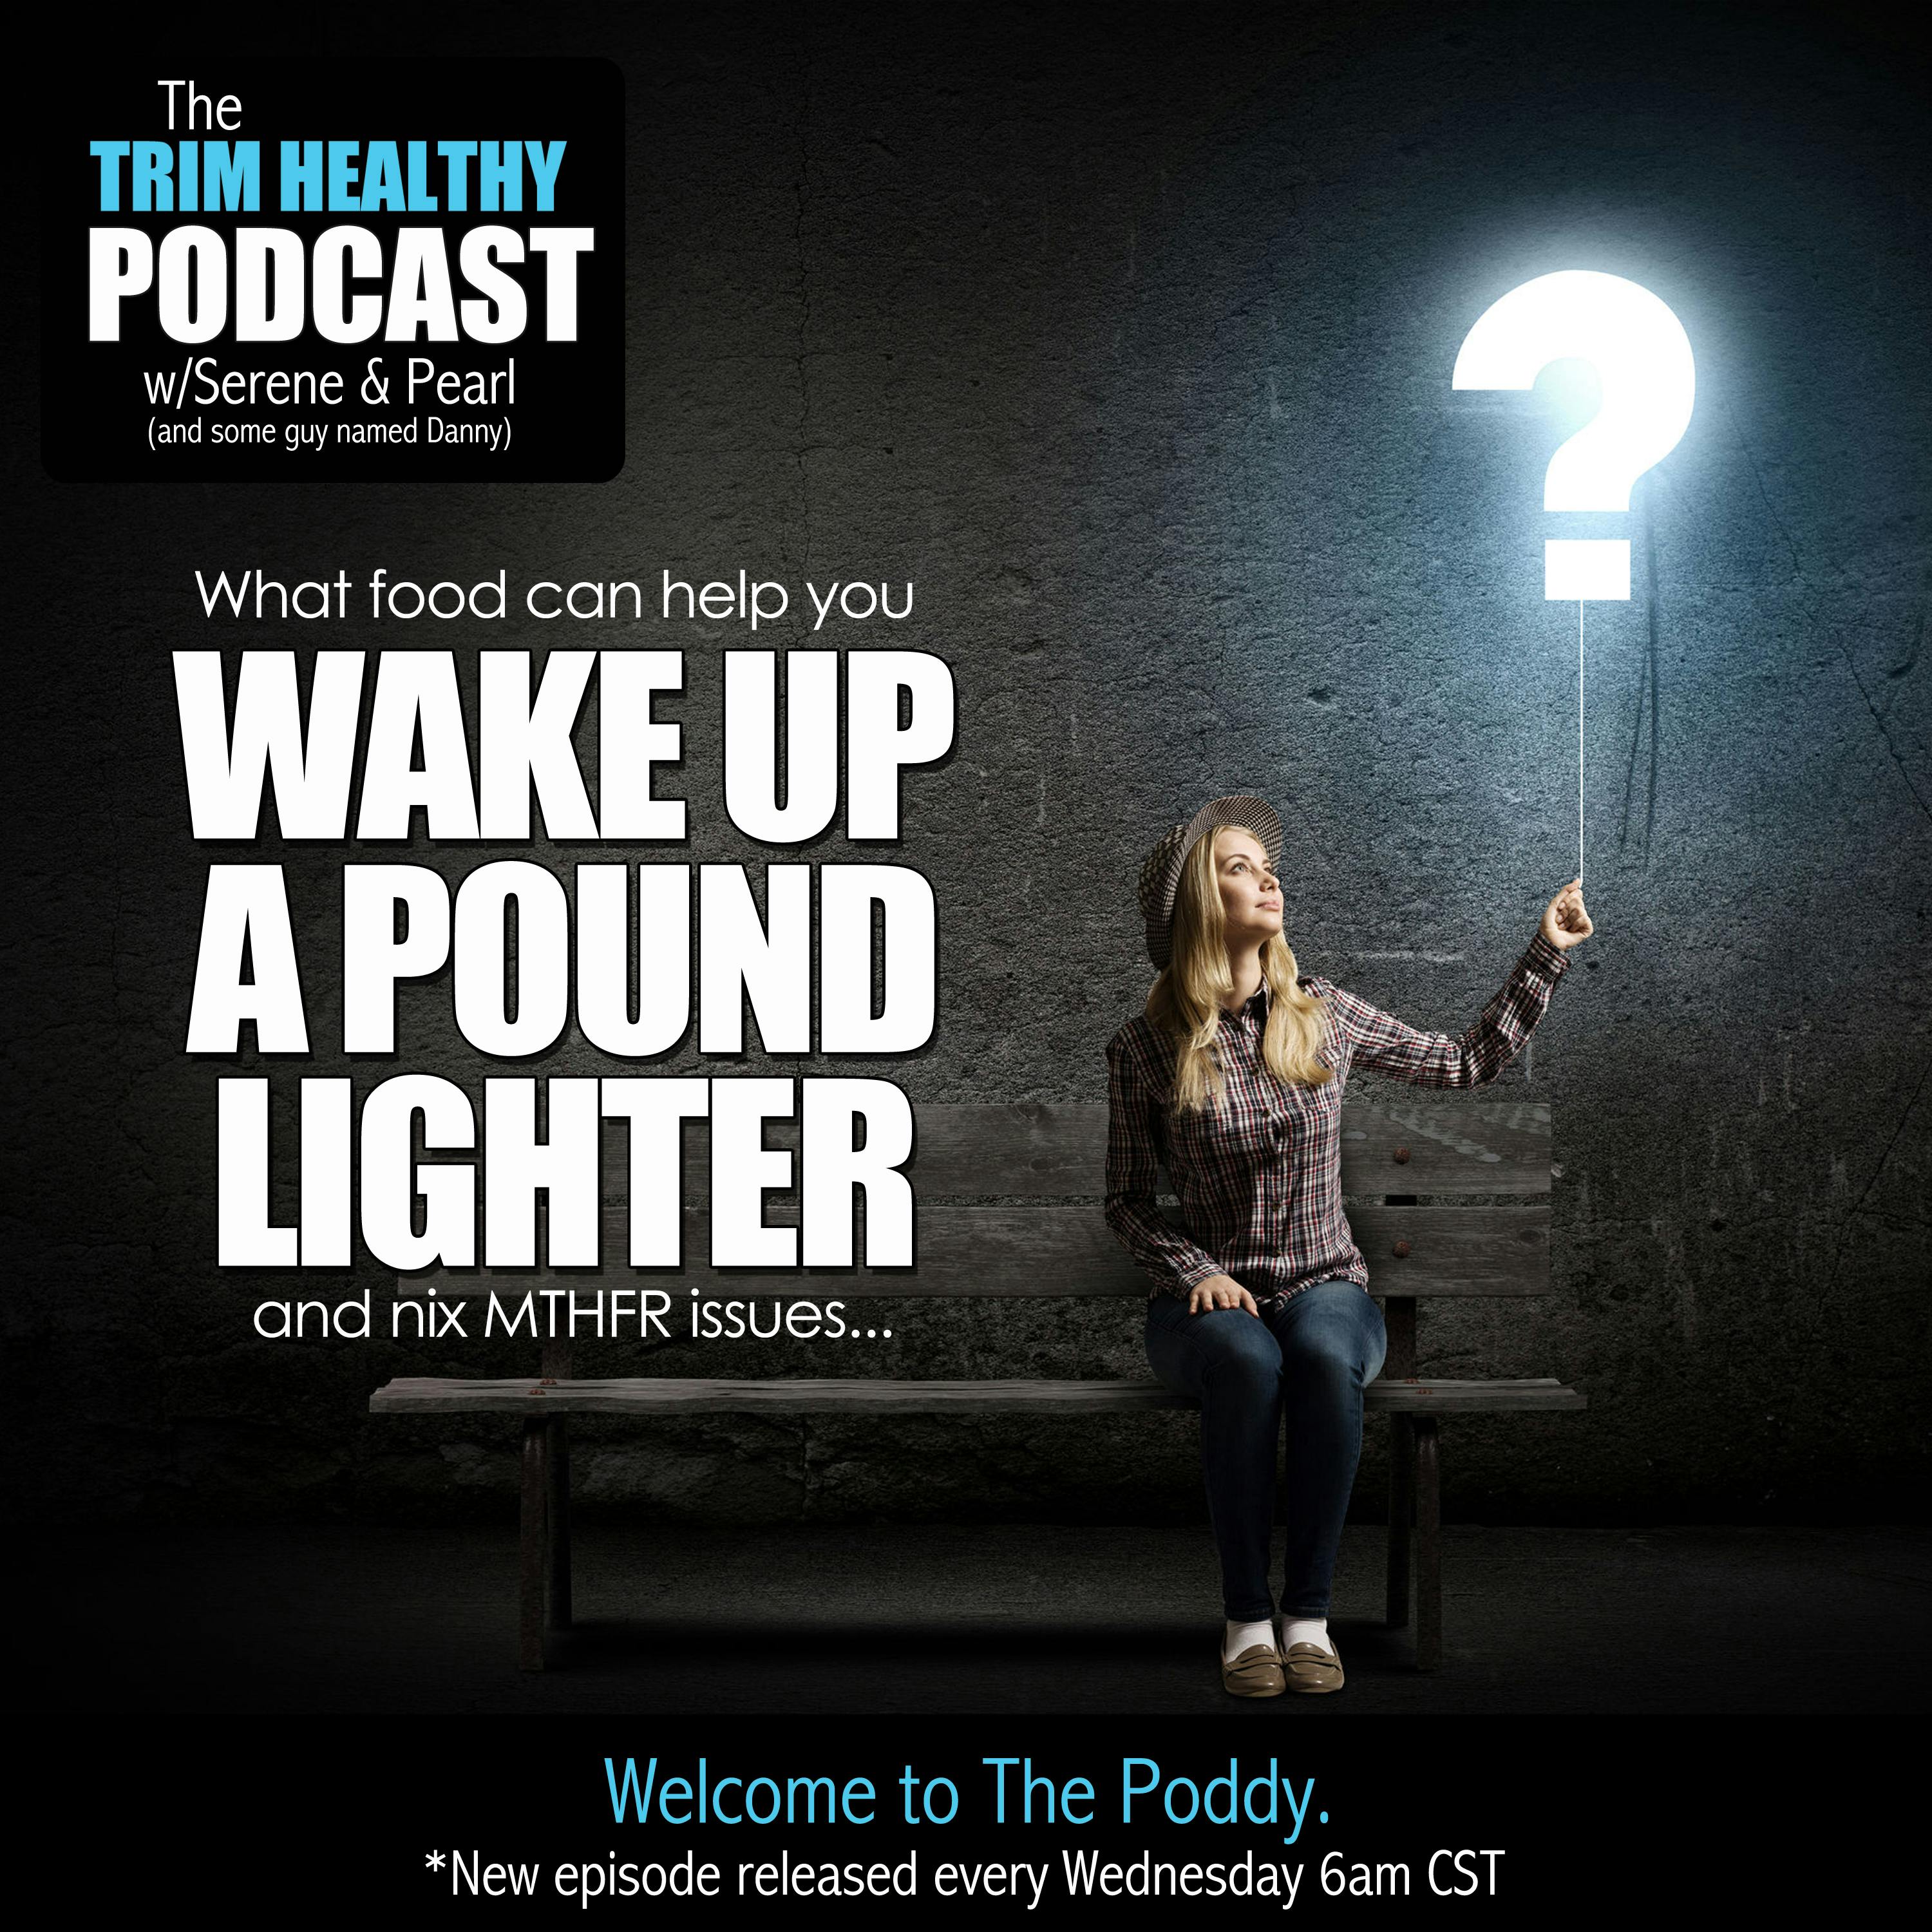 Ep. 130: What food can help you WAKE UP A POUND LIGHTER and nix MTHFR issues?